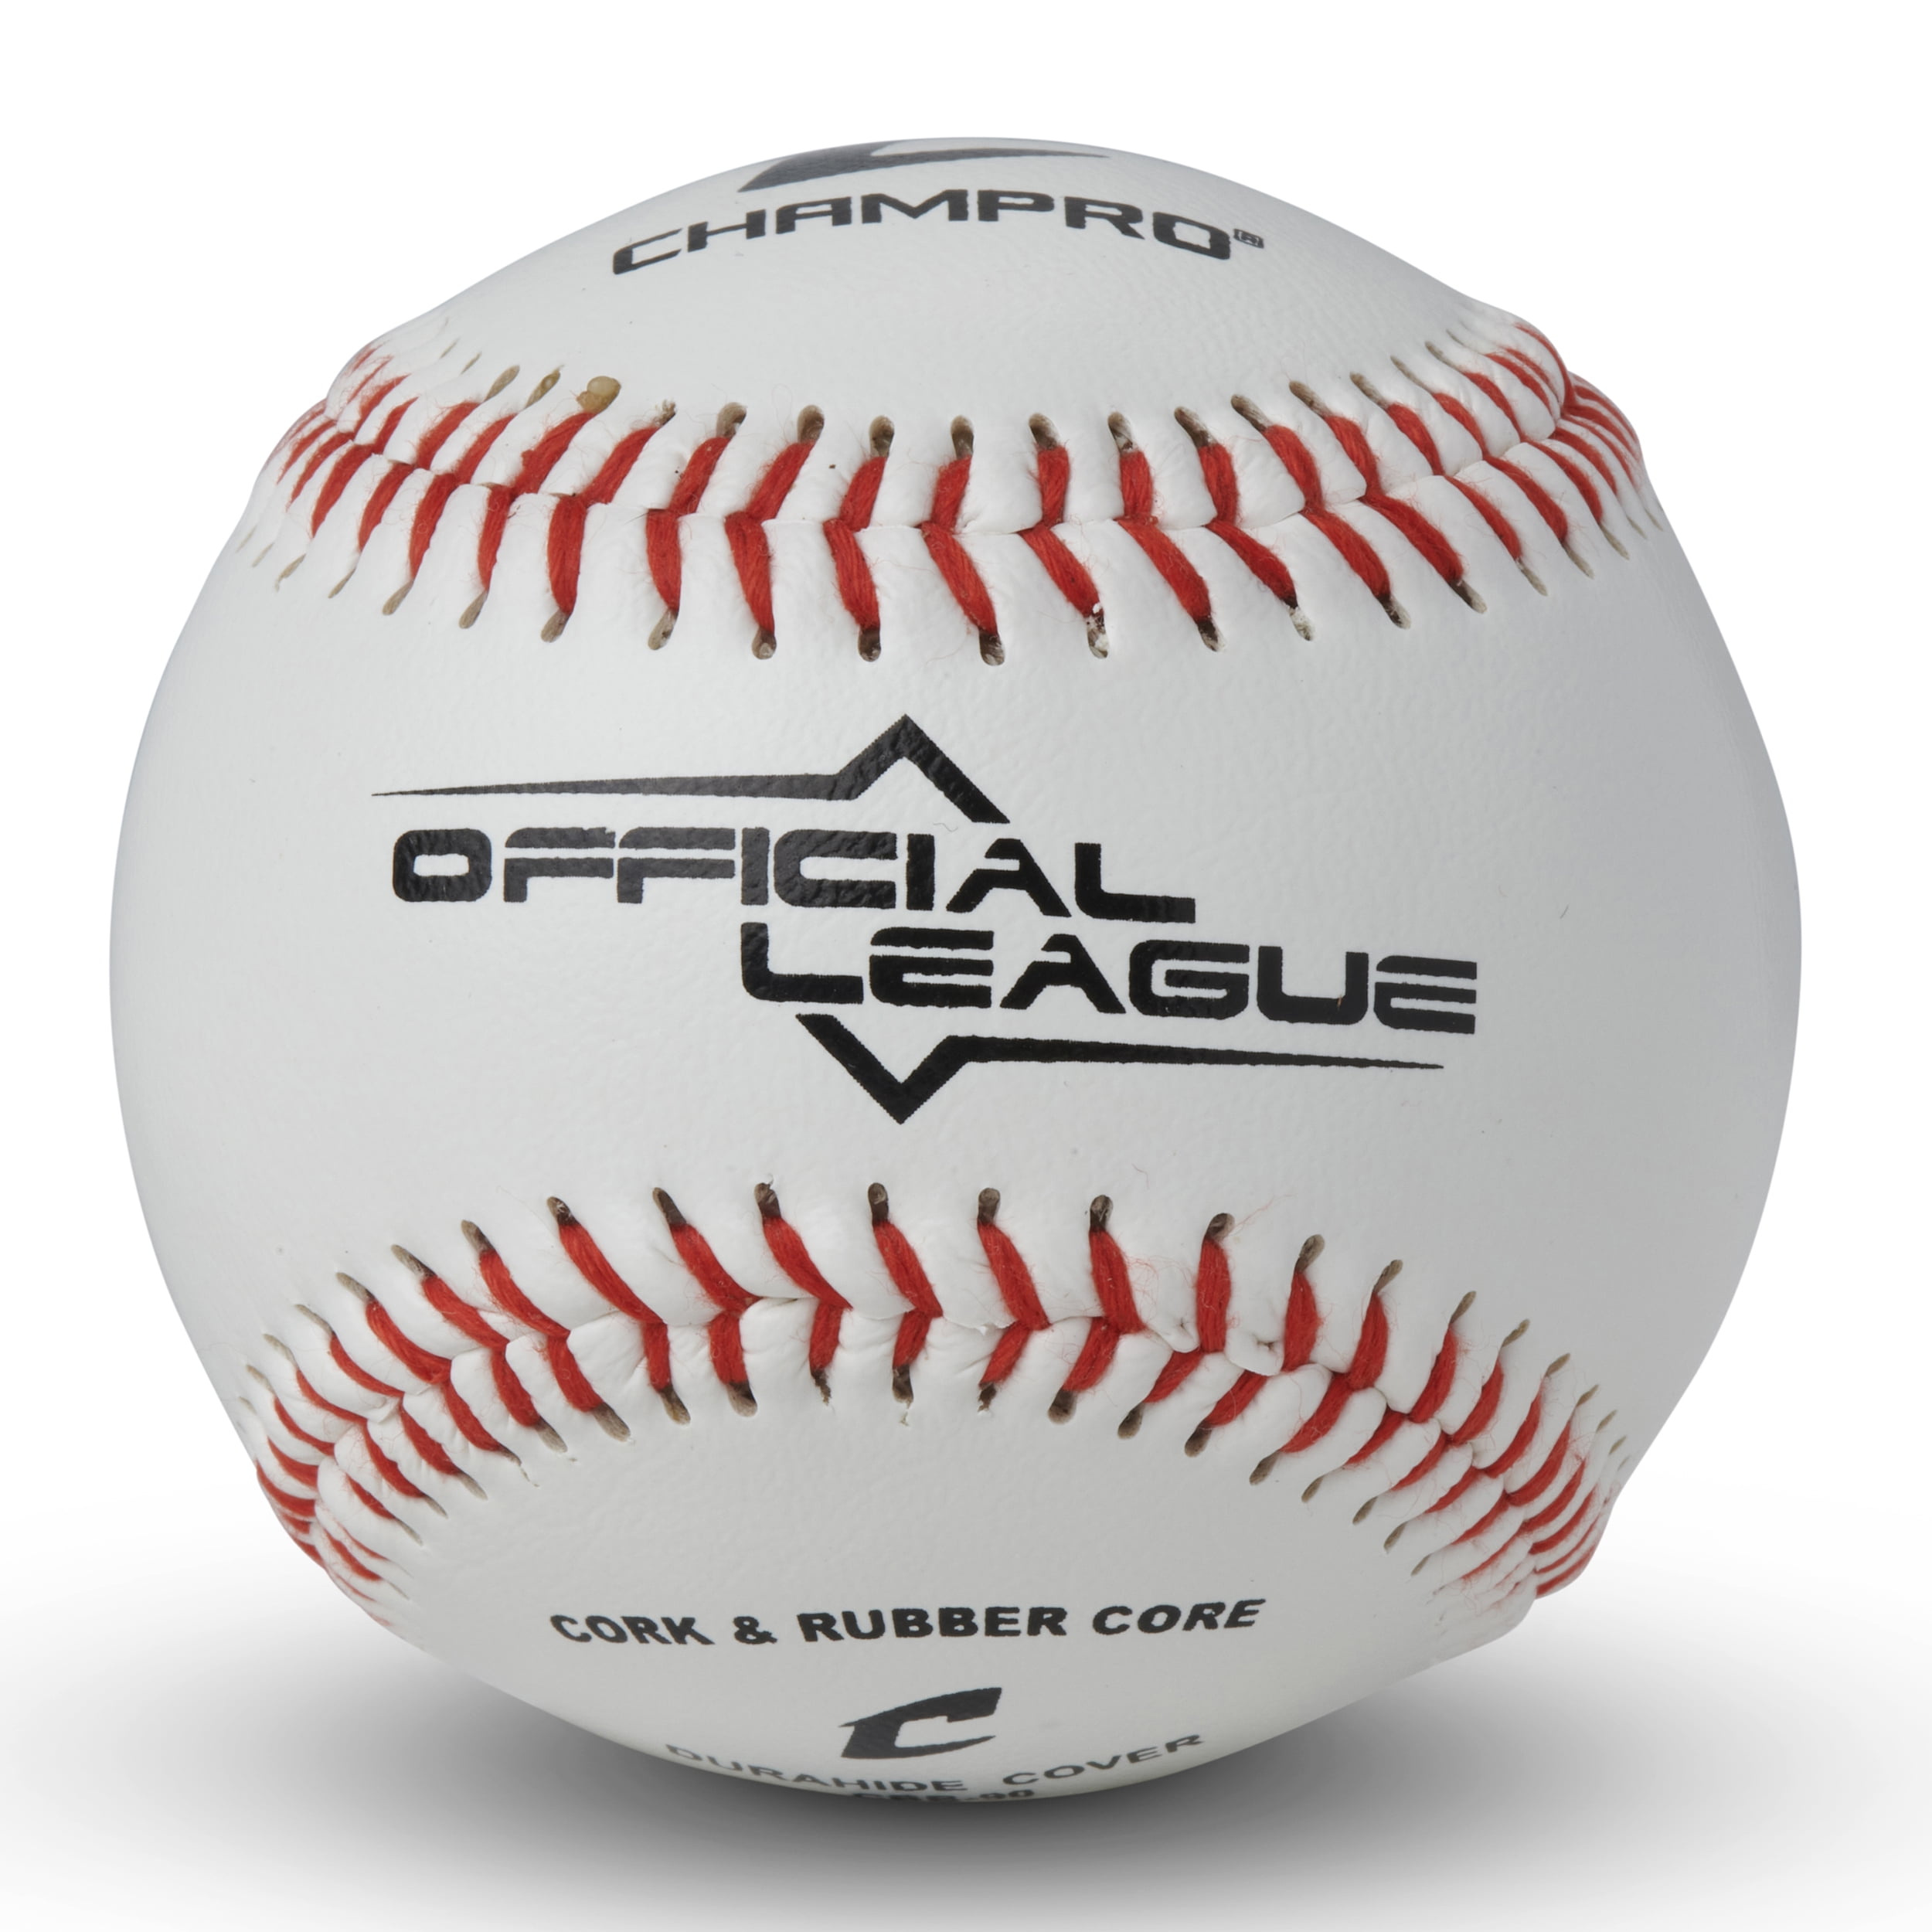 Customized Personalized Leather Baseball,Indoor/Outdoor Genuine Leather Official League Baseballs for Practice Training Or Real Game